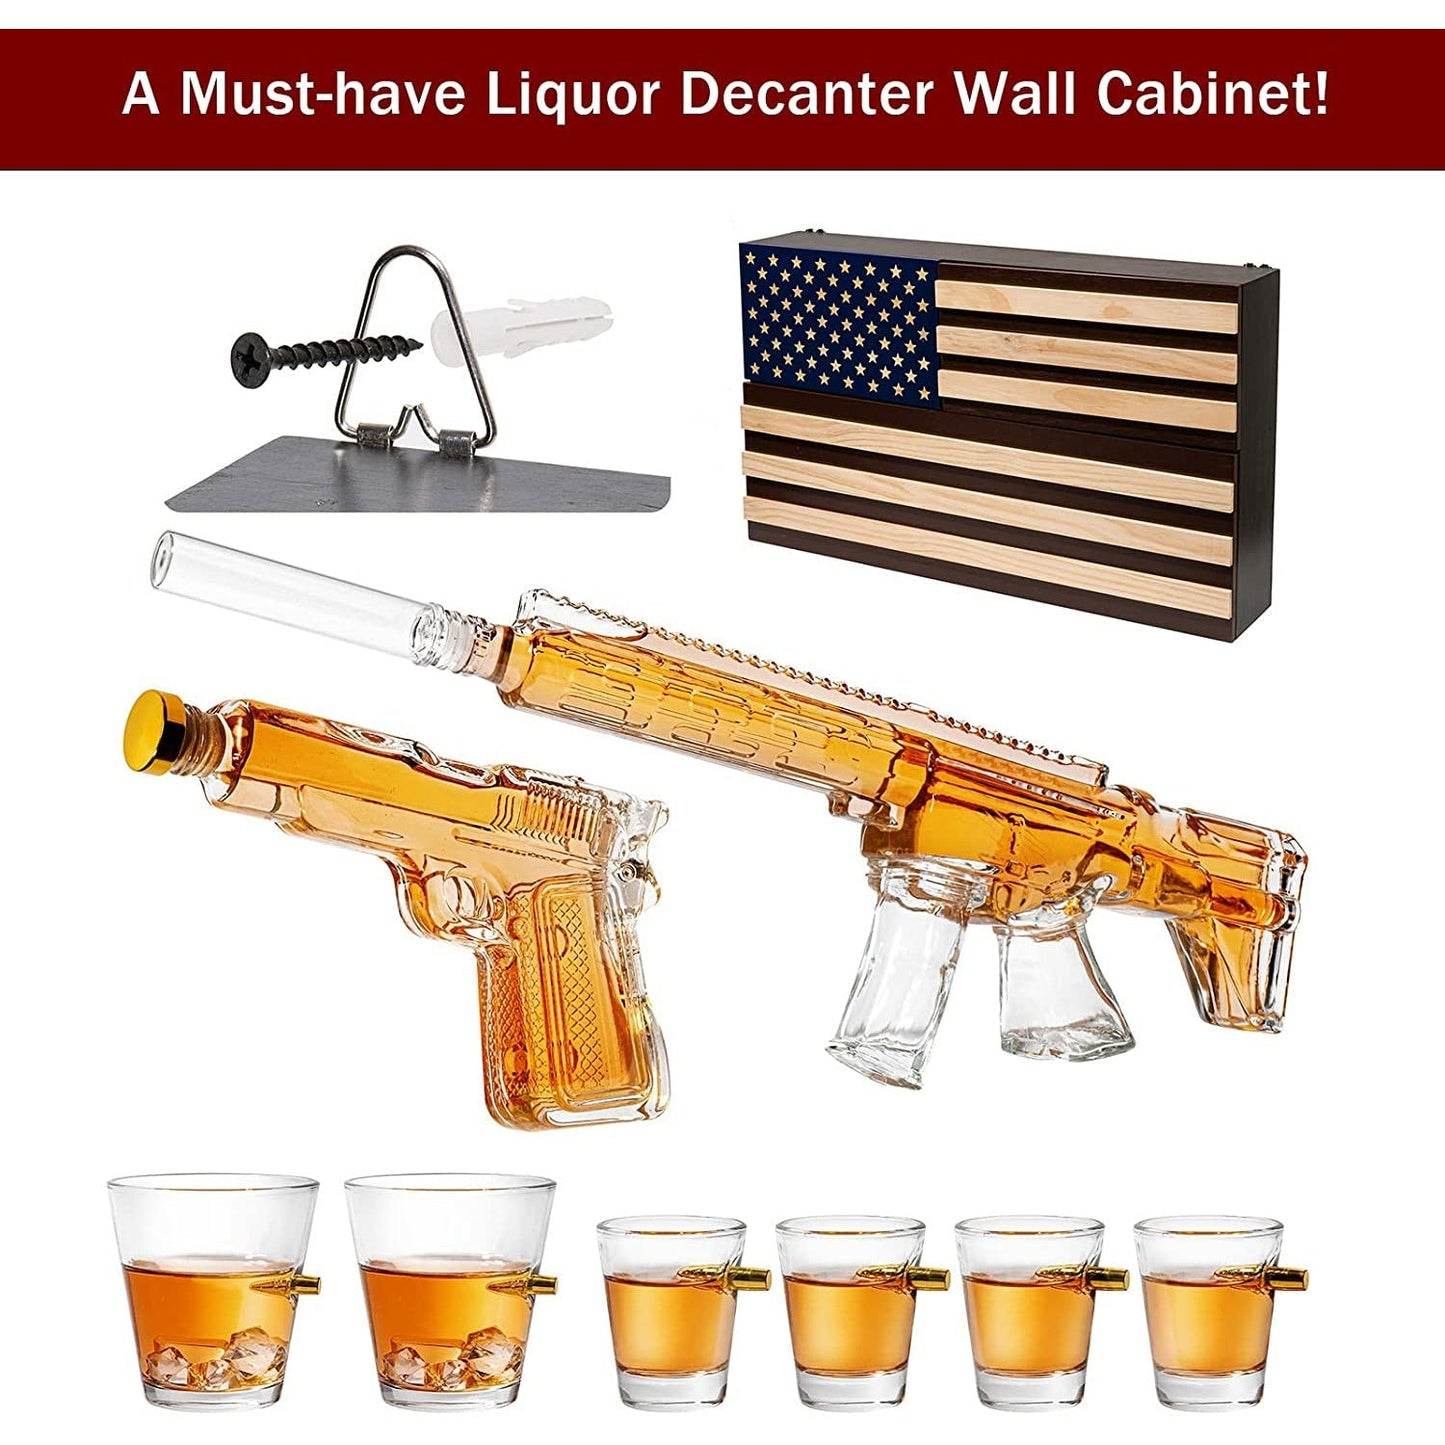 Pistol & AR15 Whiskey Decanter Set of 2 on Hidden Storage American Flag Wall Rack by The Wine Savant with 4 Bullet Shot Glasses & 2 Bullet Whiskey Glasses - Veteran Gifts, Military Gift, Home Bar Gift-1